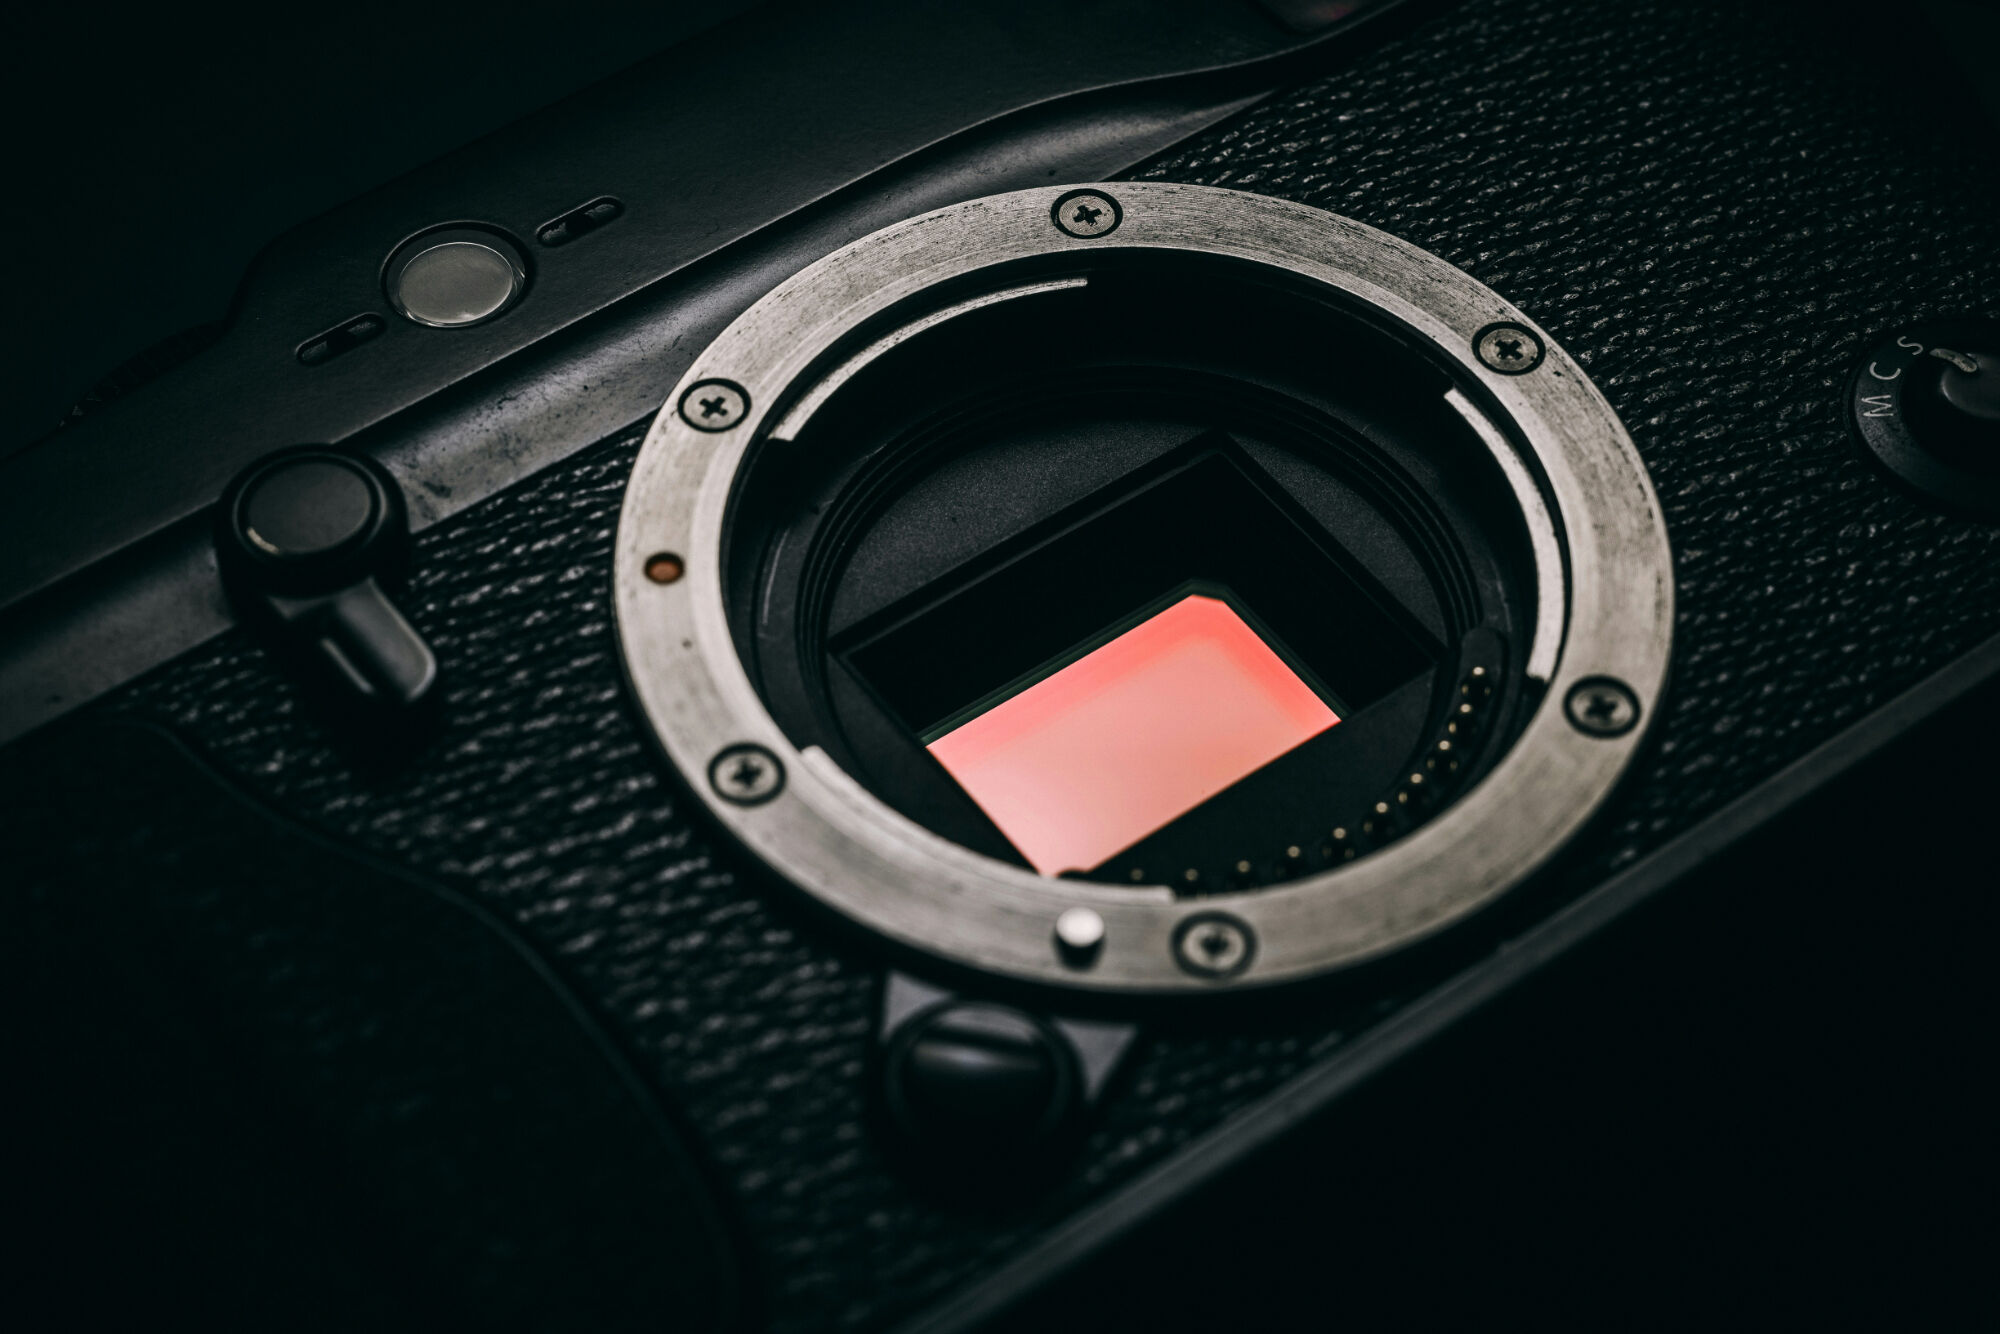 How Does Camera Image Sensor Size Affect Your Photos? – Guide for Beginners